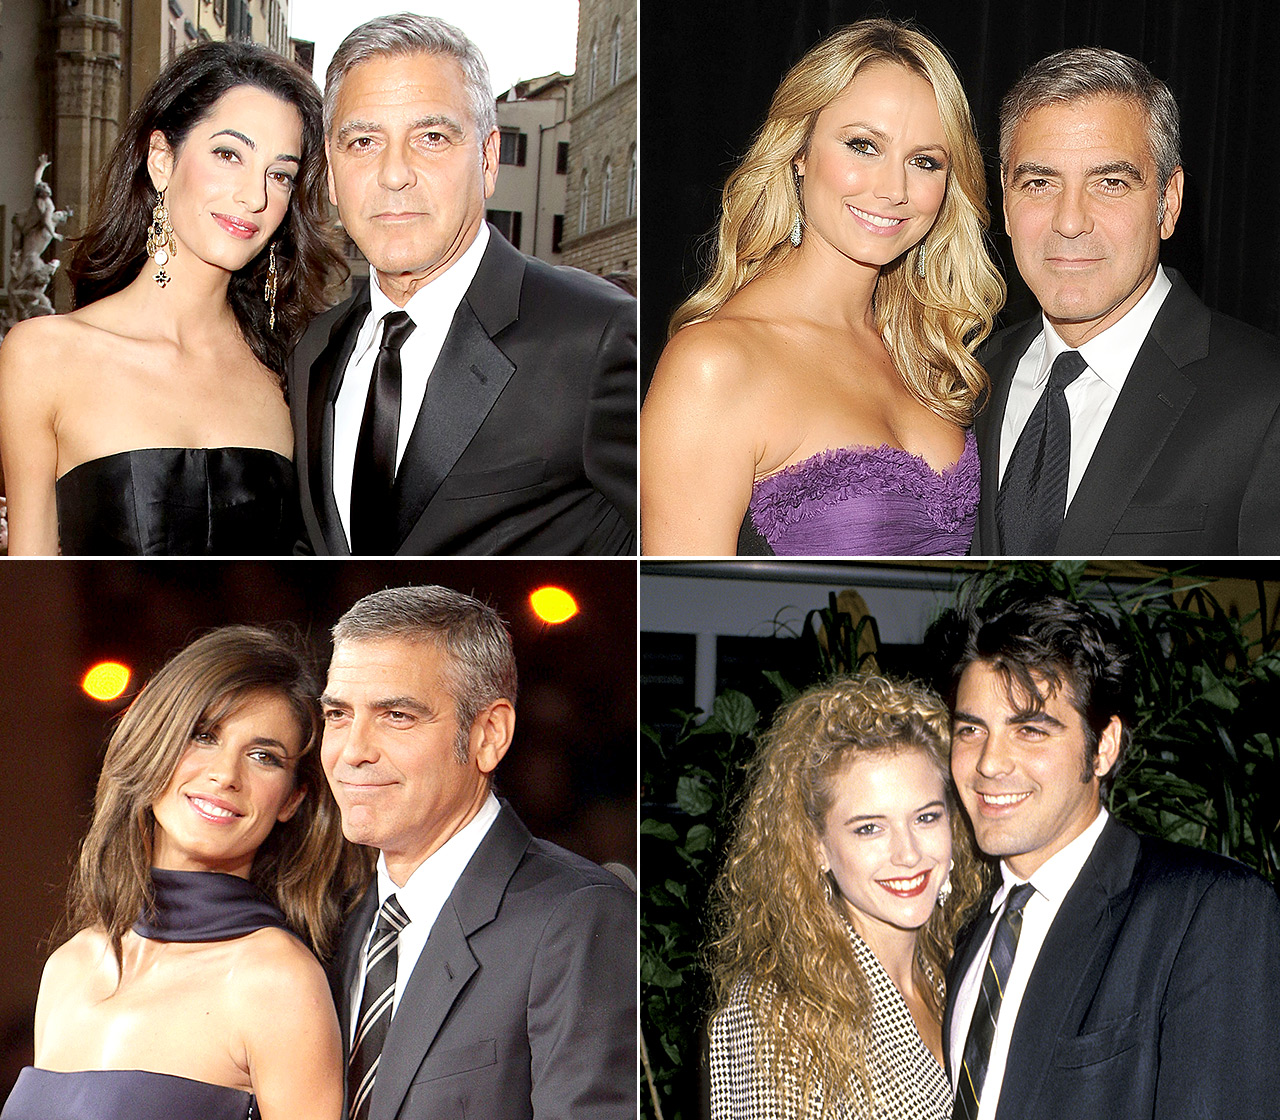 George Clooneys Dating History Timeline of Famous Exes, Girlfriend image pic